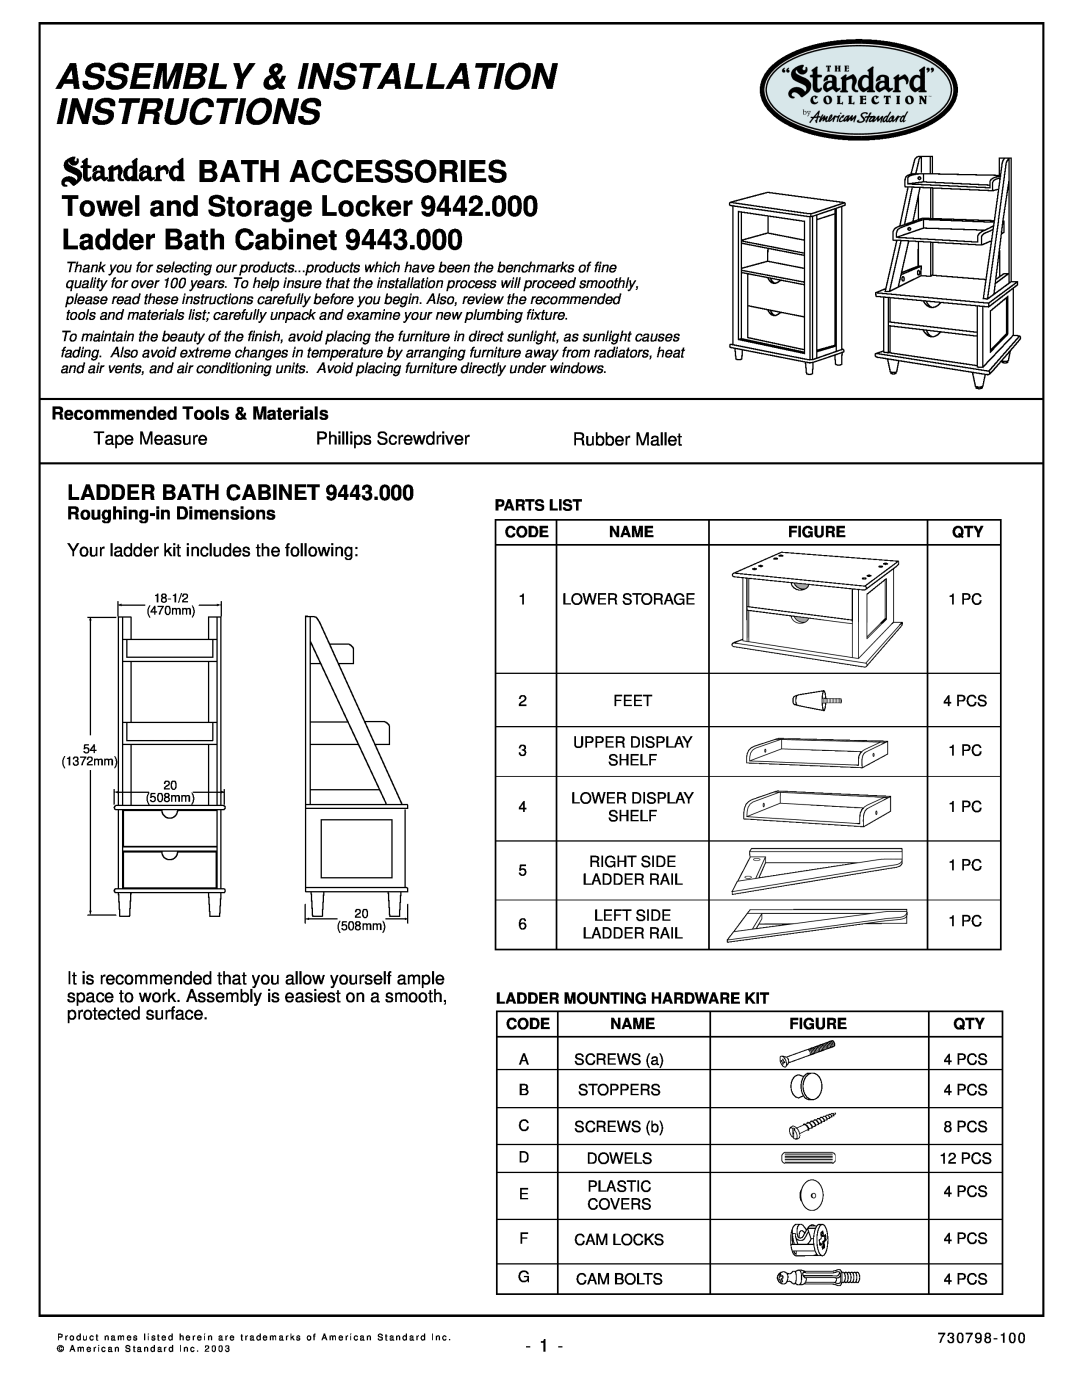 American Standard 9443.000 installation instructions Ladder Bath Cabinet, Recommended Tools & Materials, Bath Accessories 